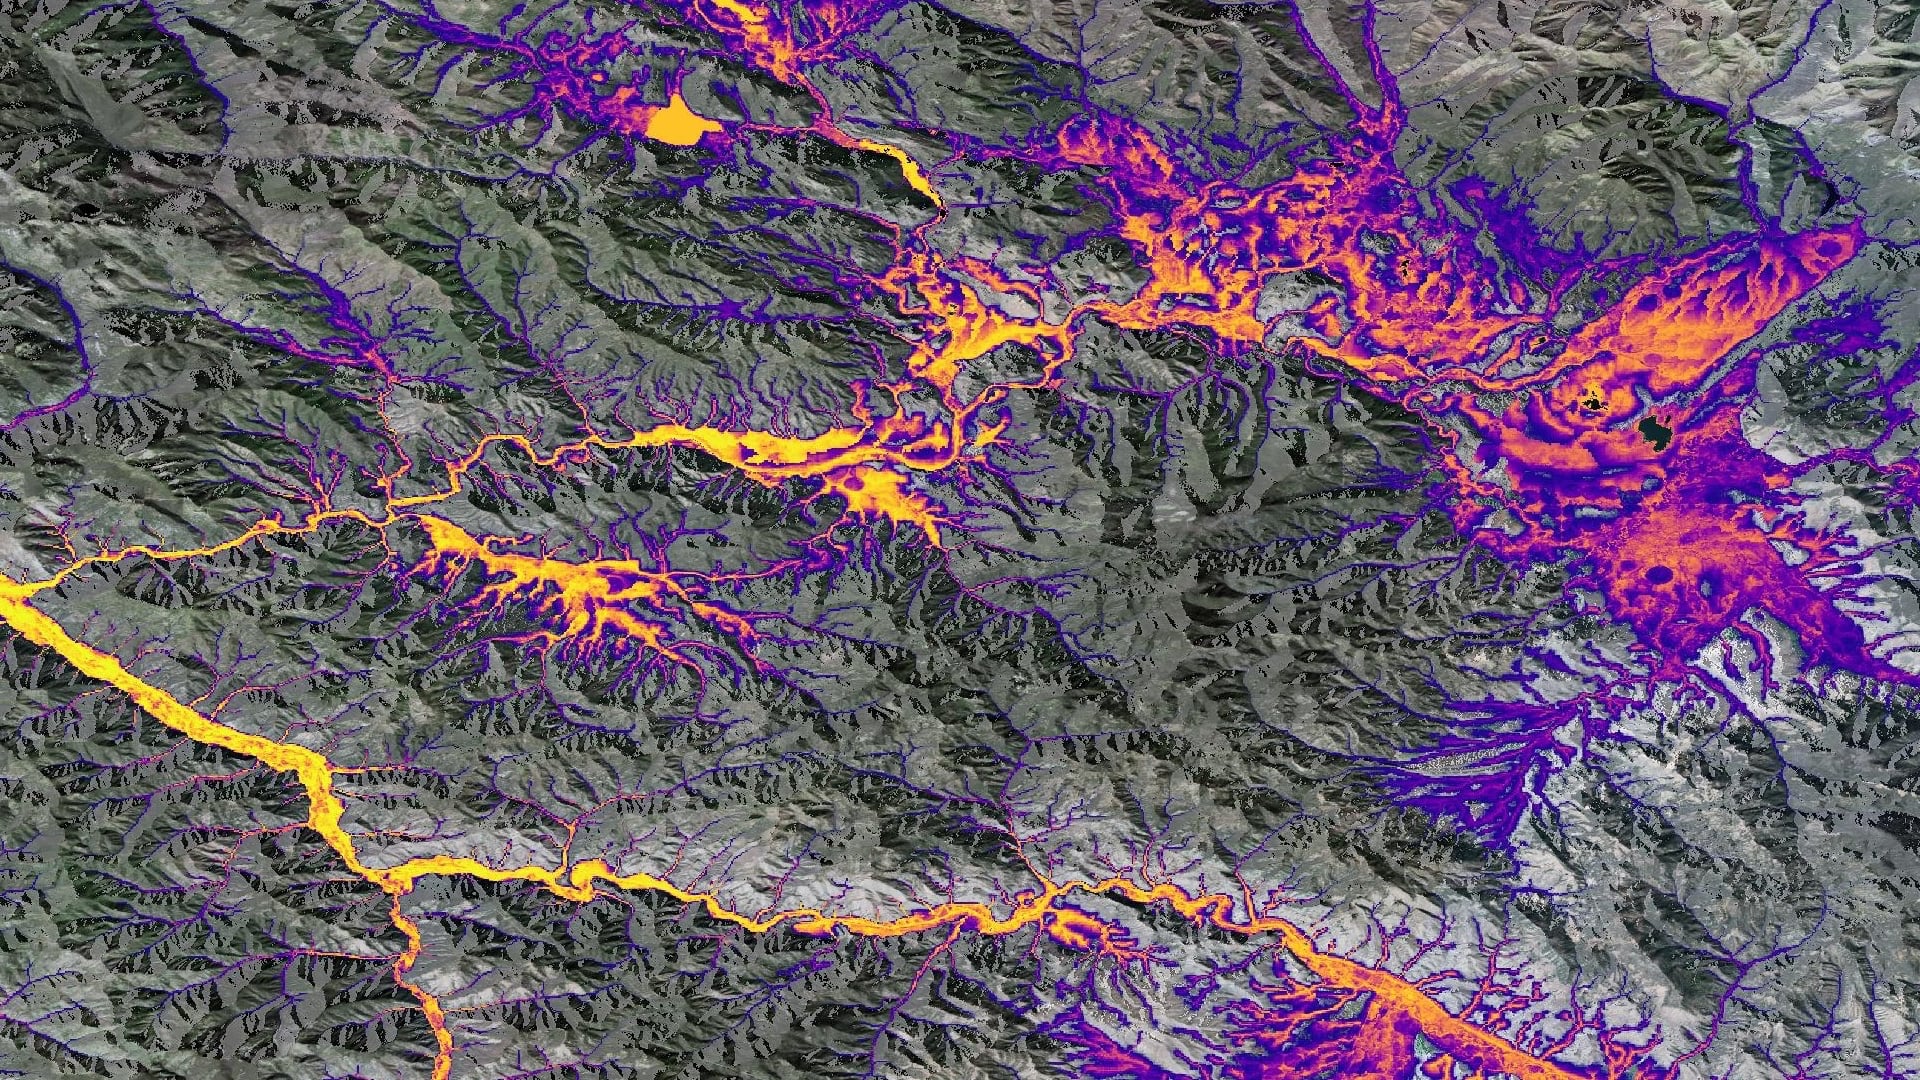 Habitat suitability prediction model for mink (Mustela vison) near Missoula, Montana. Yellow areas indicate higher probability for suitable habitat, and purple indicates lower probability. This map can direct study locations for researchers investigating contaminant levels among bioindicator species. Data were derived from Landsat 8 OLI imagery, HAND, SRTM, GPM IMERG, Terra MODIS LST & Burned Area Monthly Global, and USGS National Land Cover Database. All composite data were collected from 2013 to 2020.Keywords: Western Montana, riverine ecosystems, environmental contaminants, SAHM, bioaccumulation